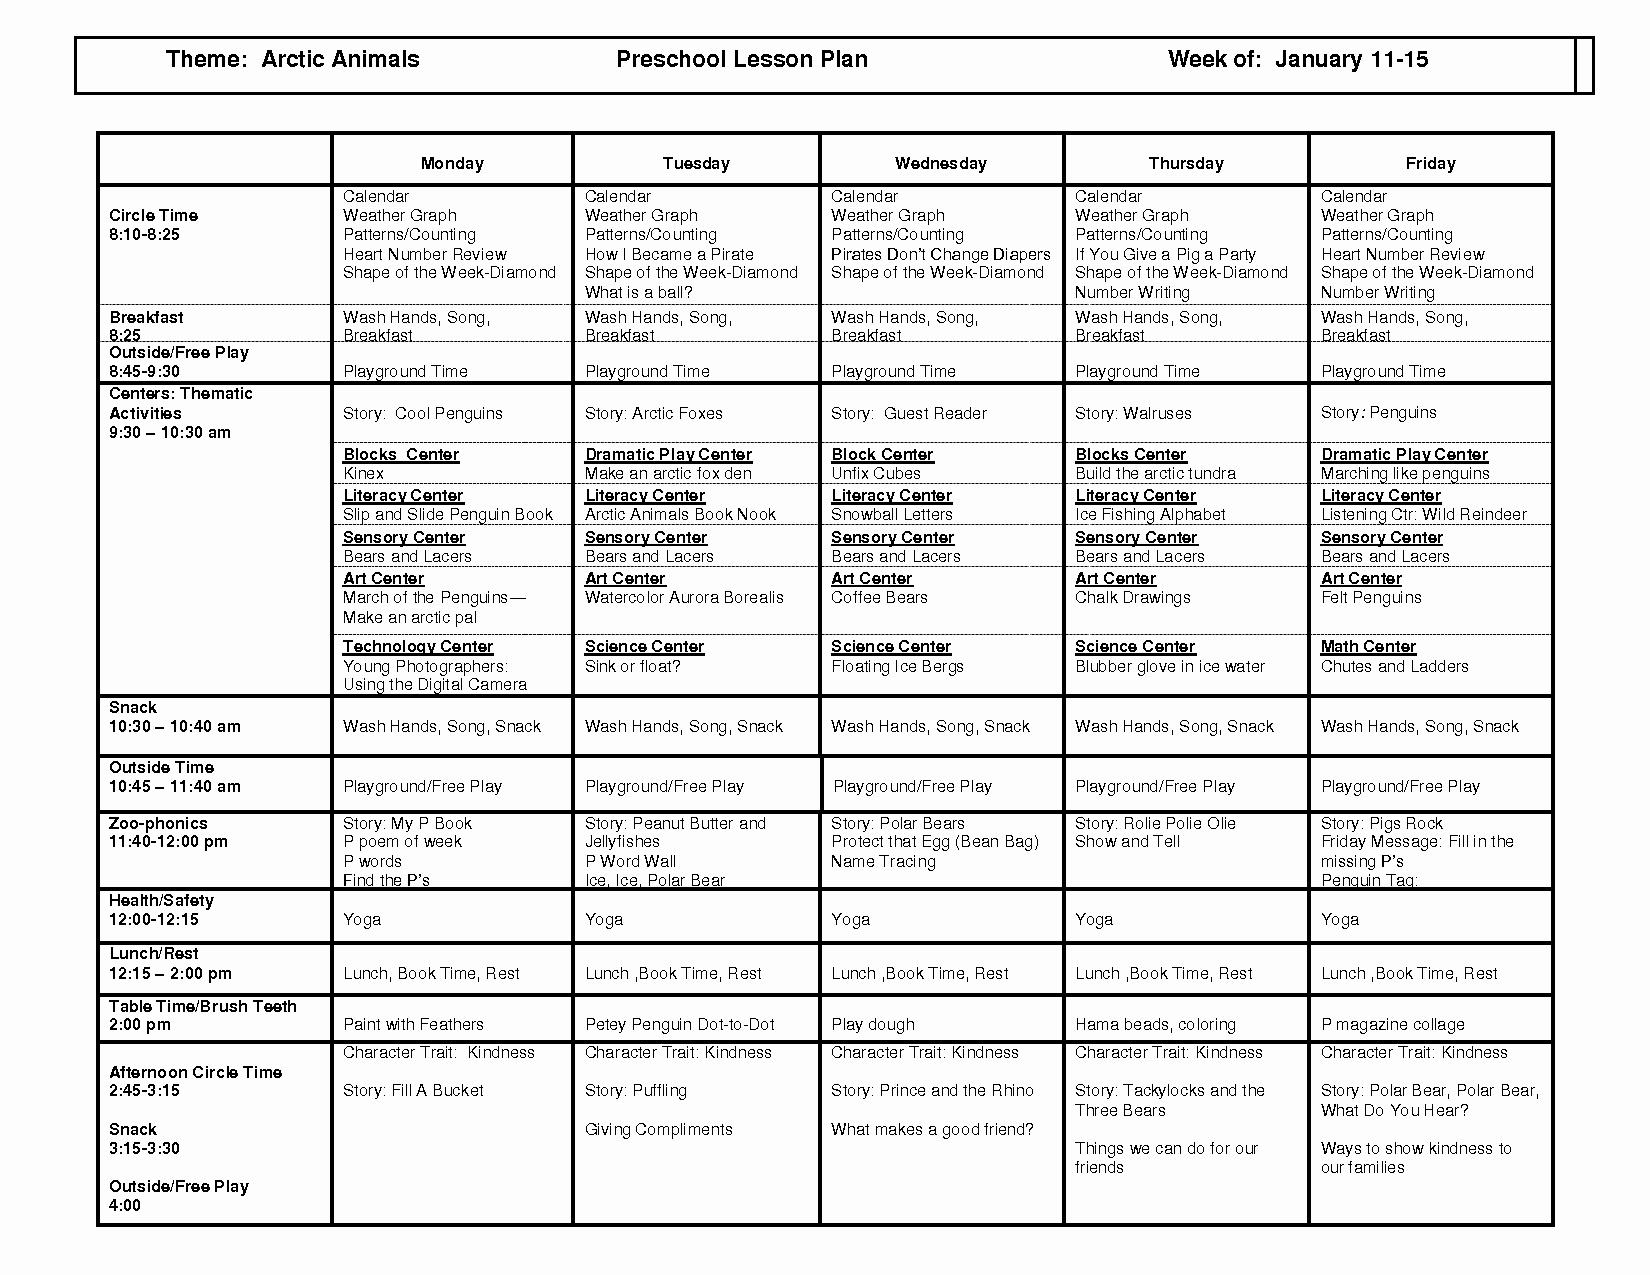 Pre Kindergarten Lesson Plan Template Awesome Pin by Mallory Gann On Future Teaching Ideas